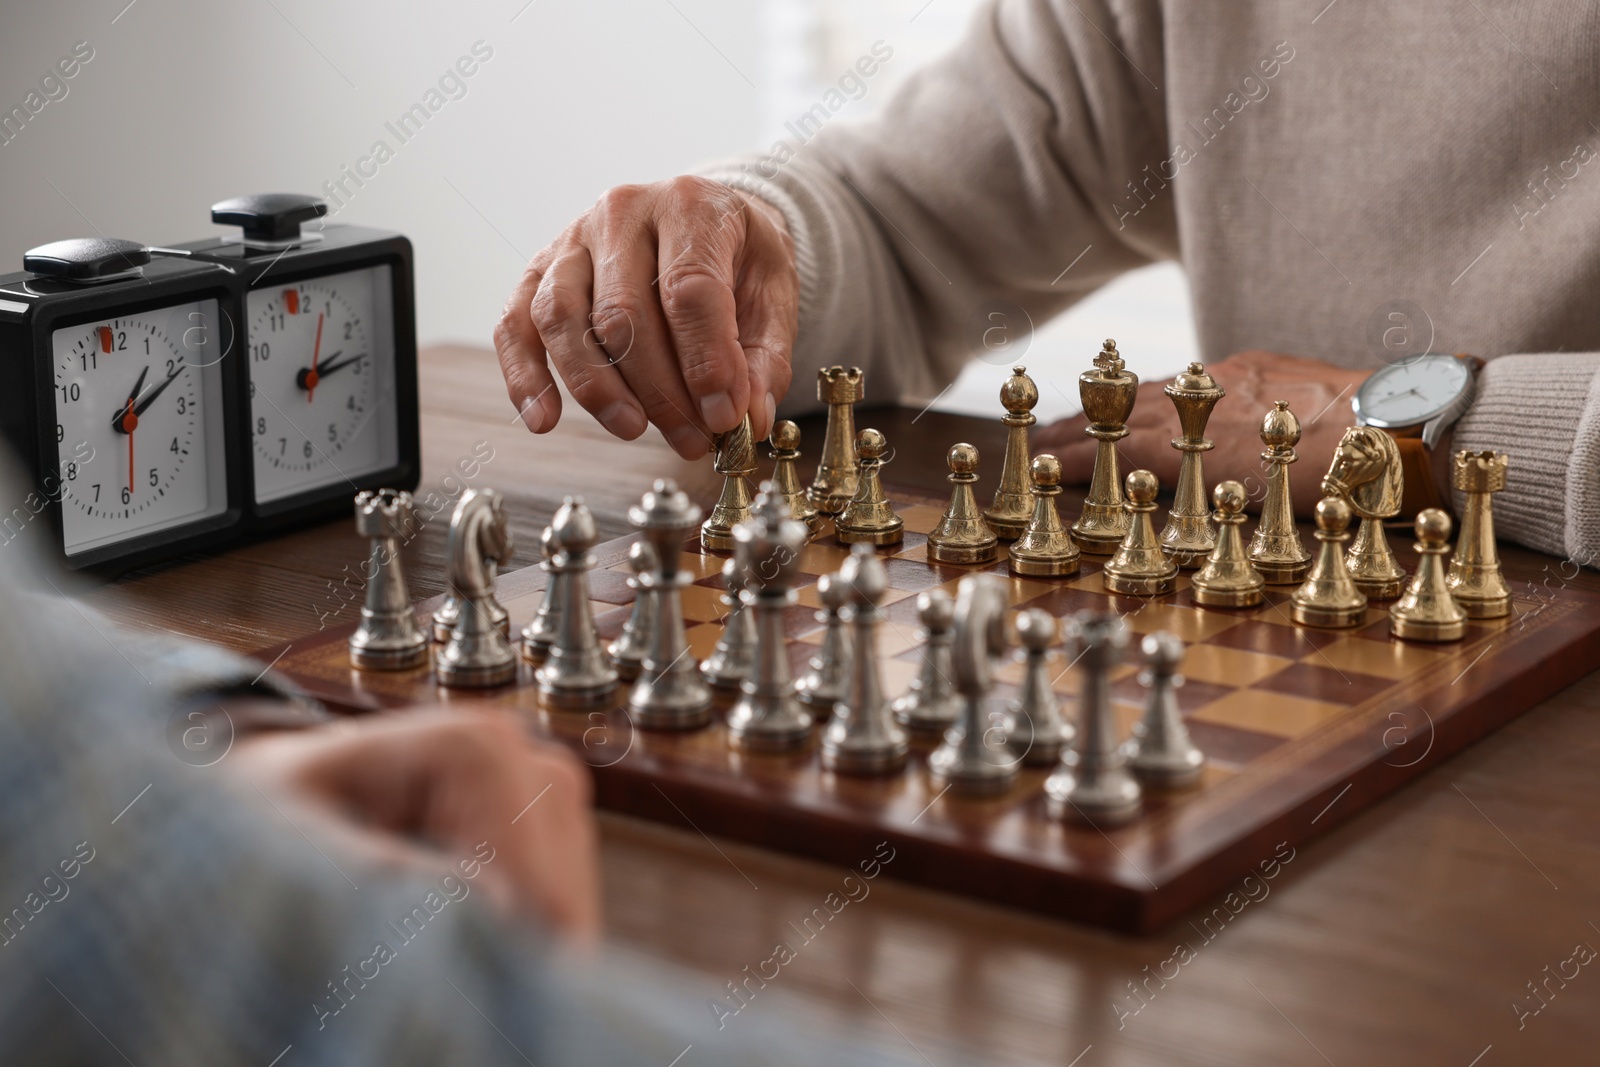 Photo of Men playing chess during tournament at table, closeup